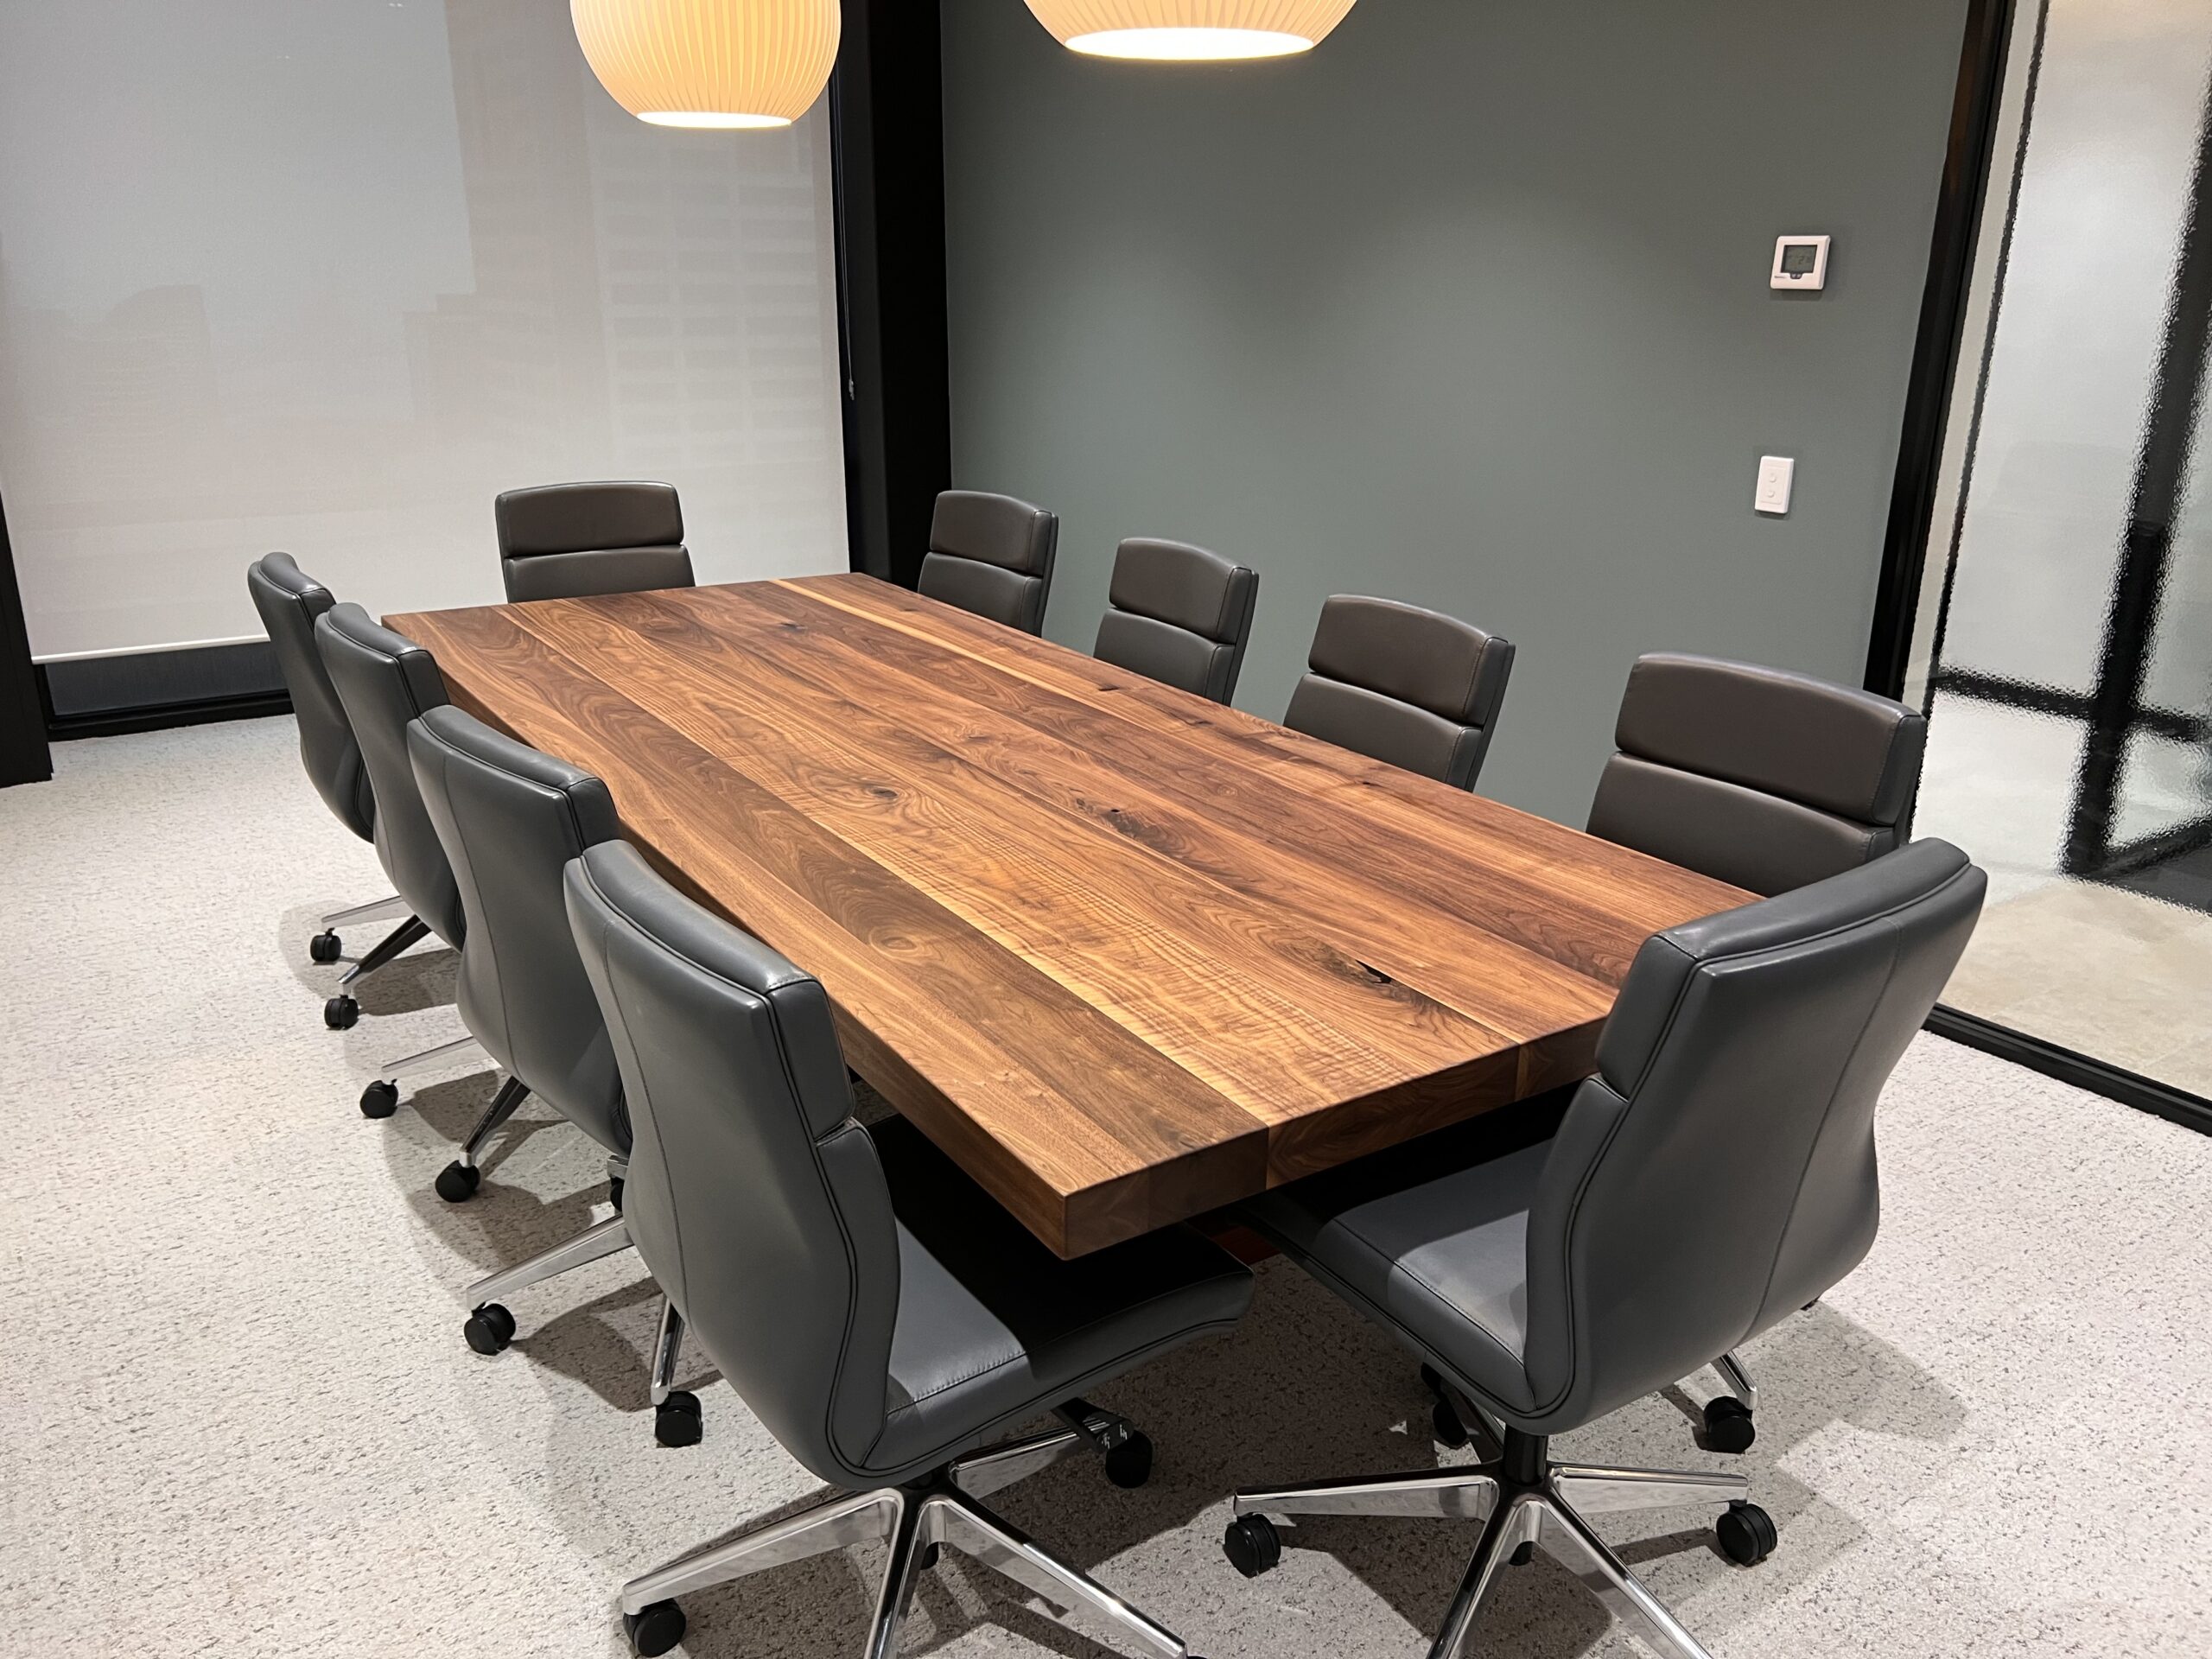 Boardroom Table by Arranmore Furniture